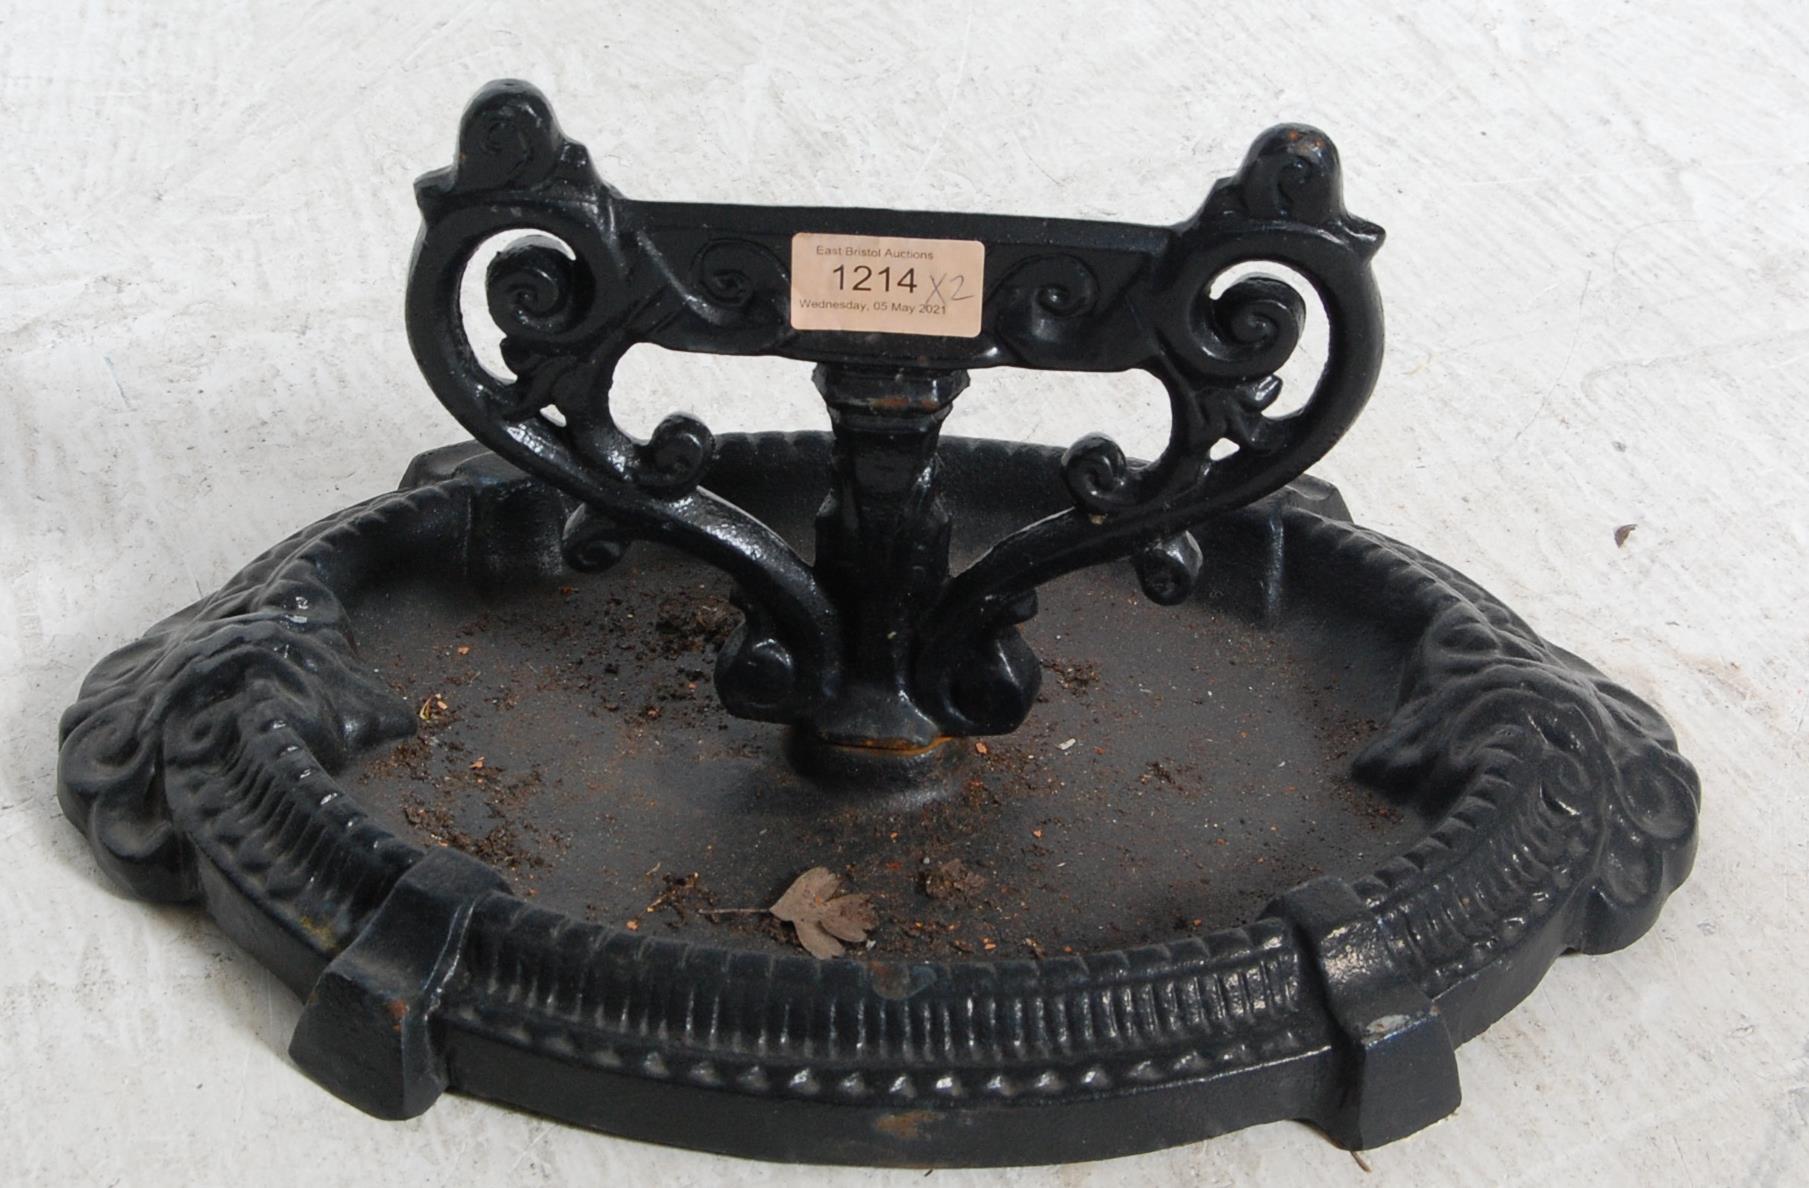 ANTIQUE STYLE CAST IRON TABLE BASE AND BOOT SCRAPER - Image 4 of 5